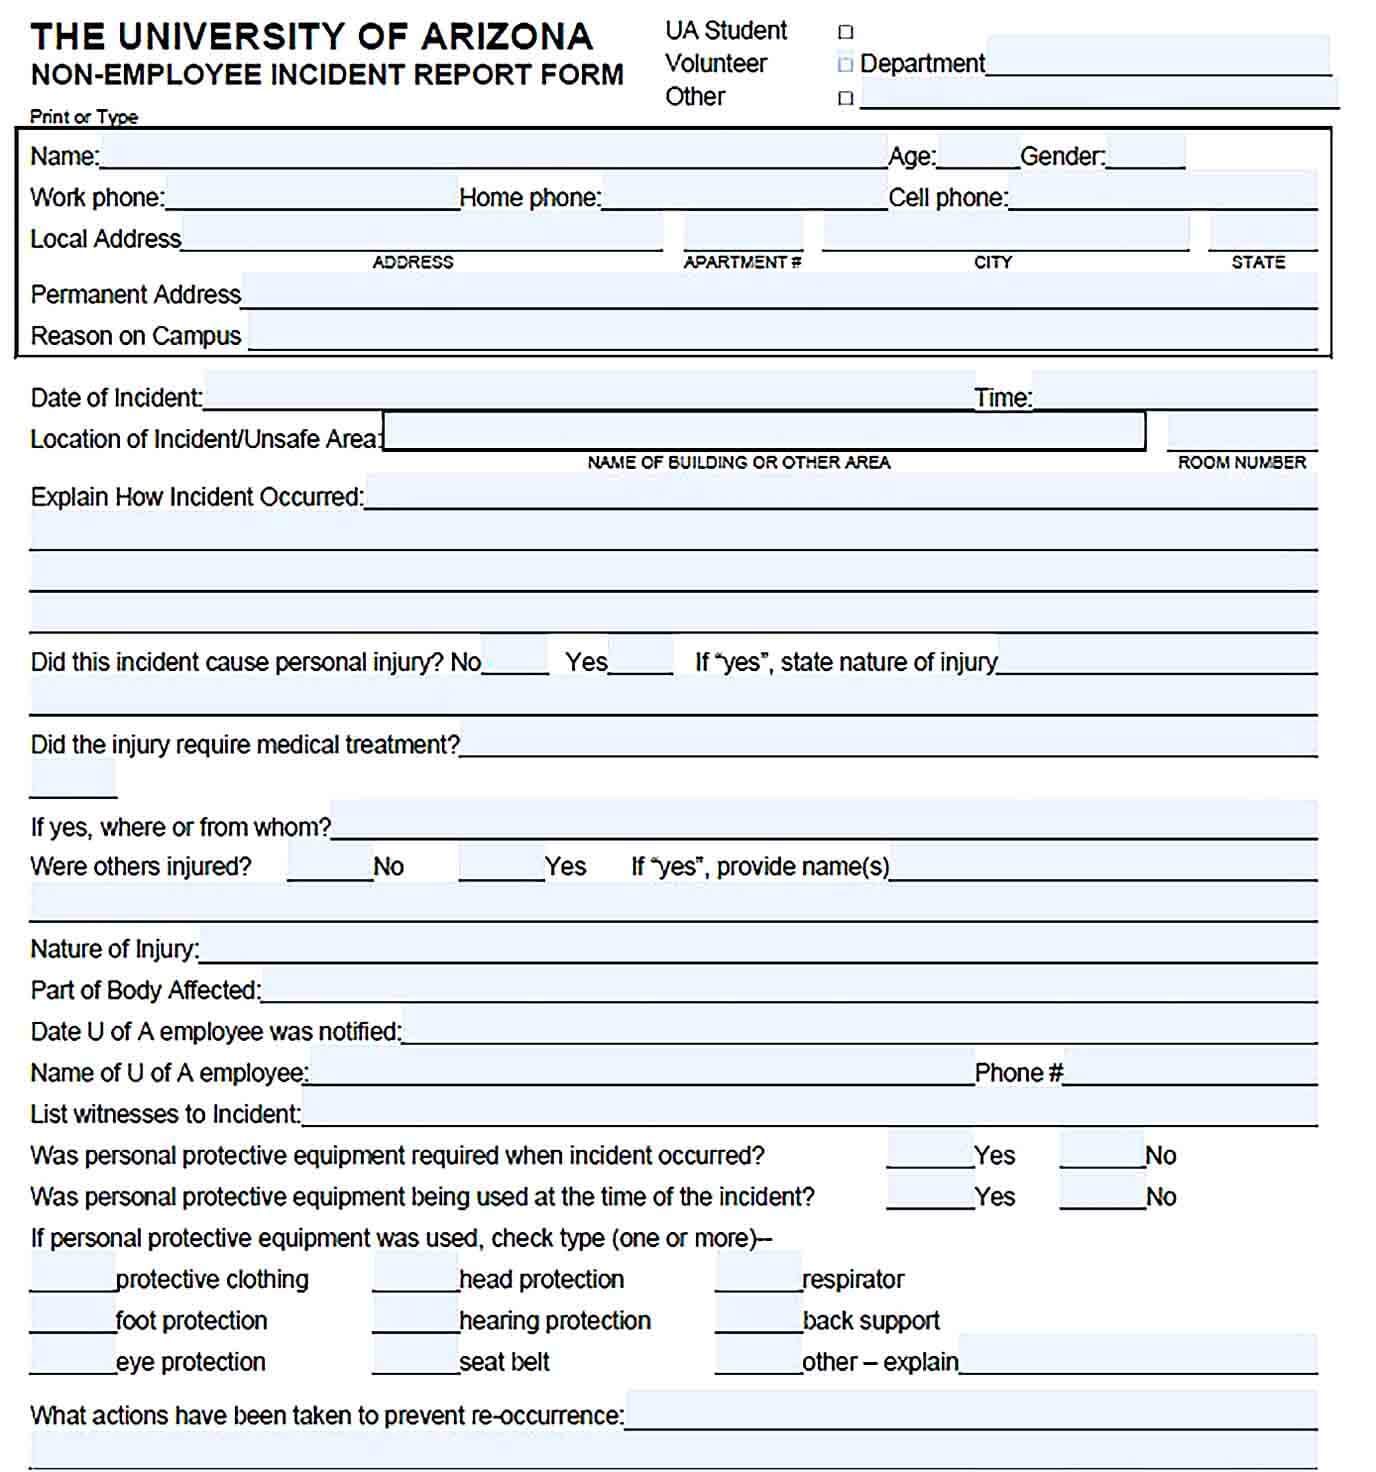 Sample Non Employee Incident Report Form